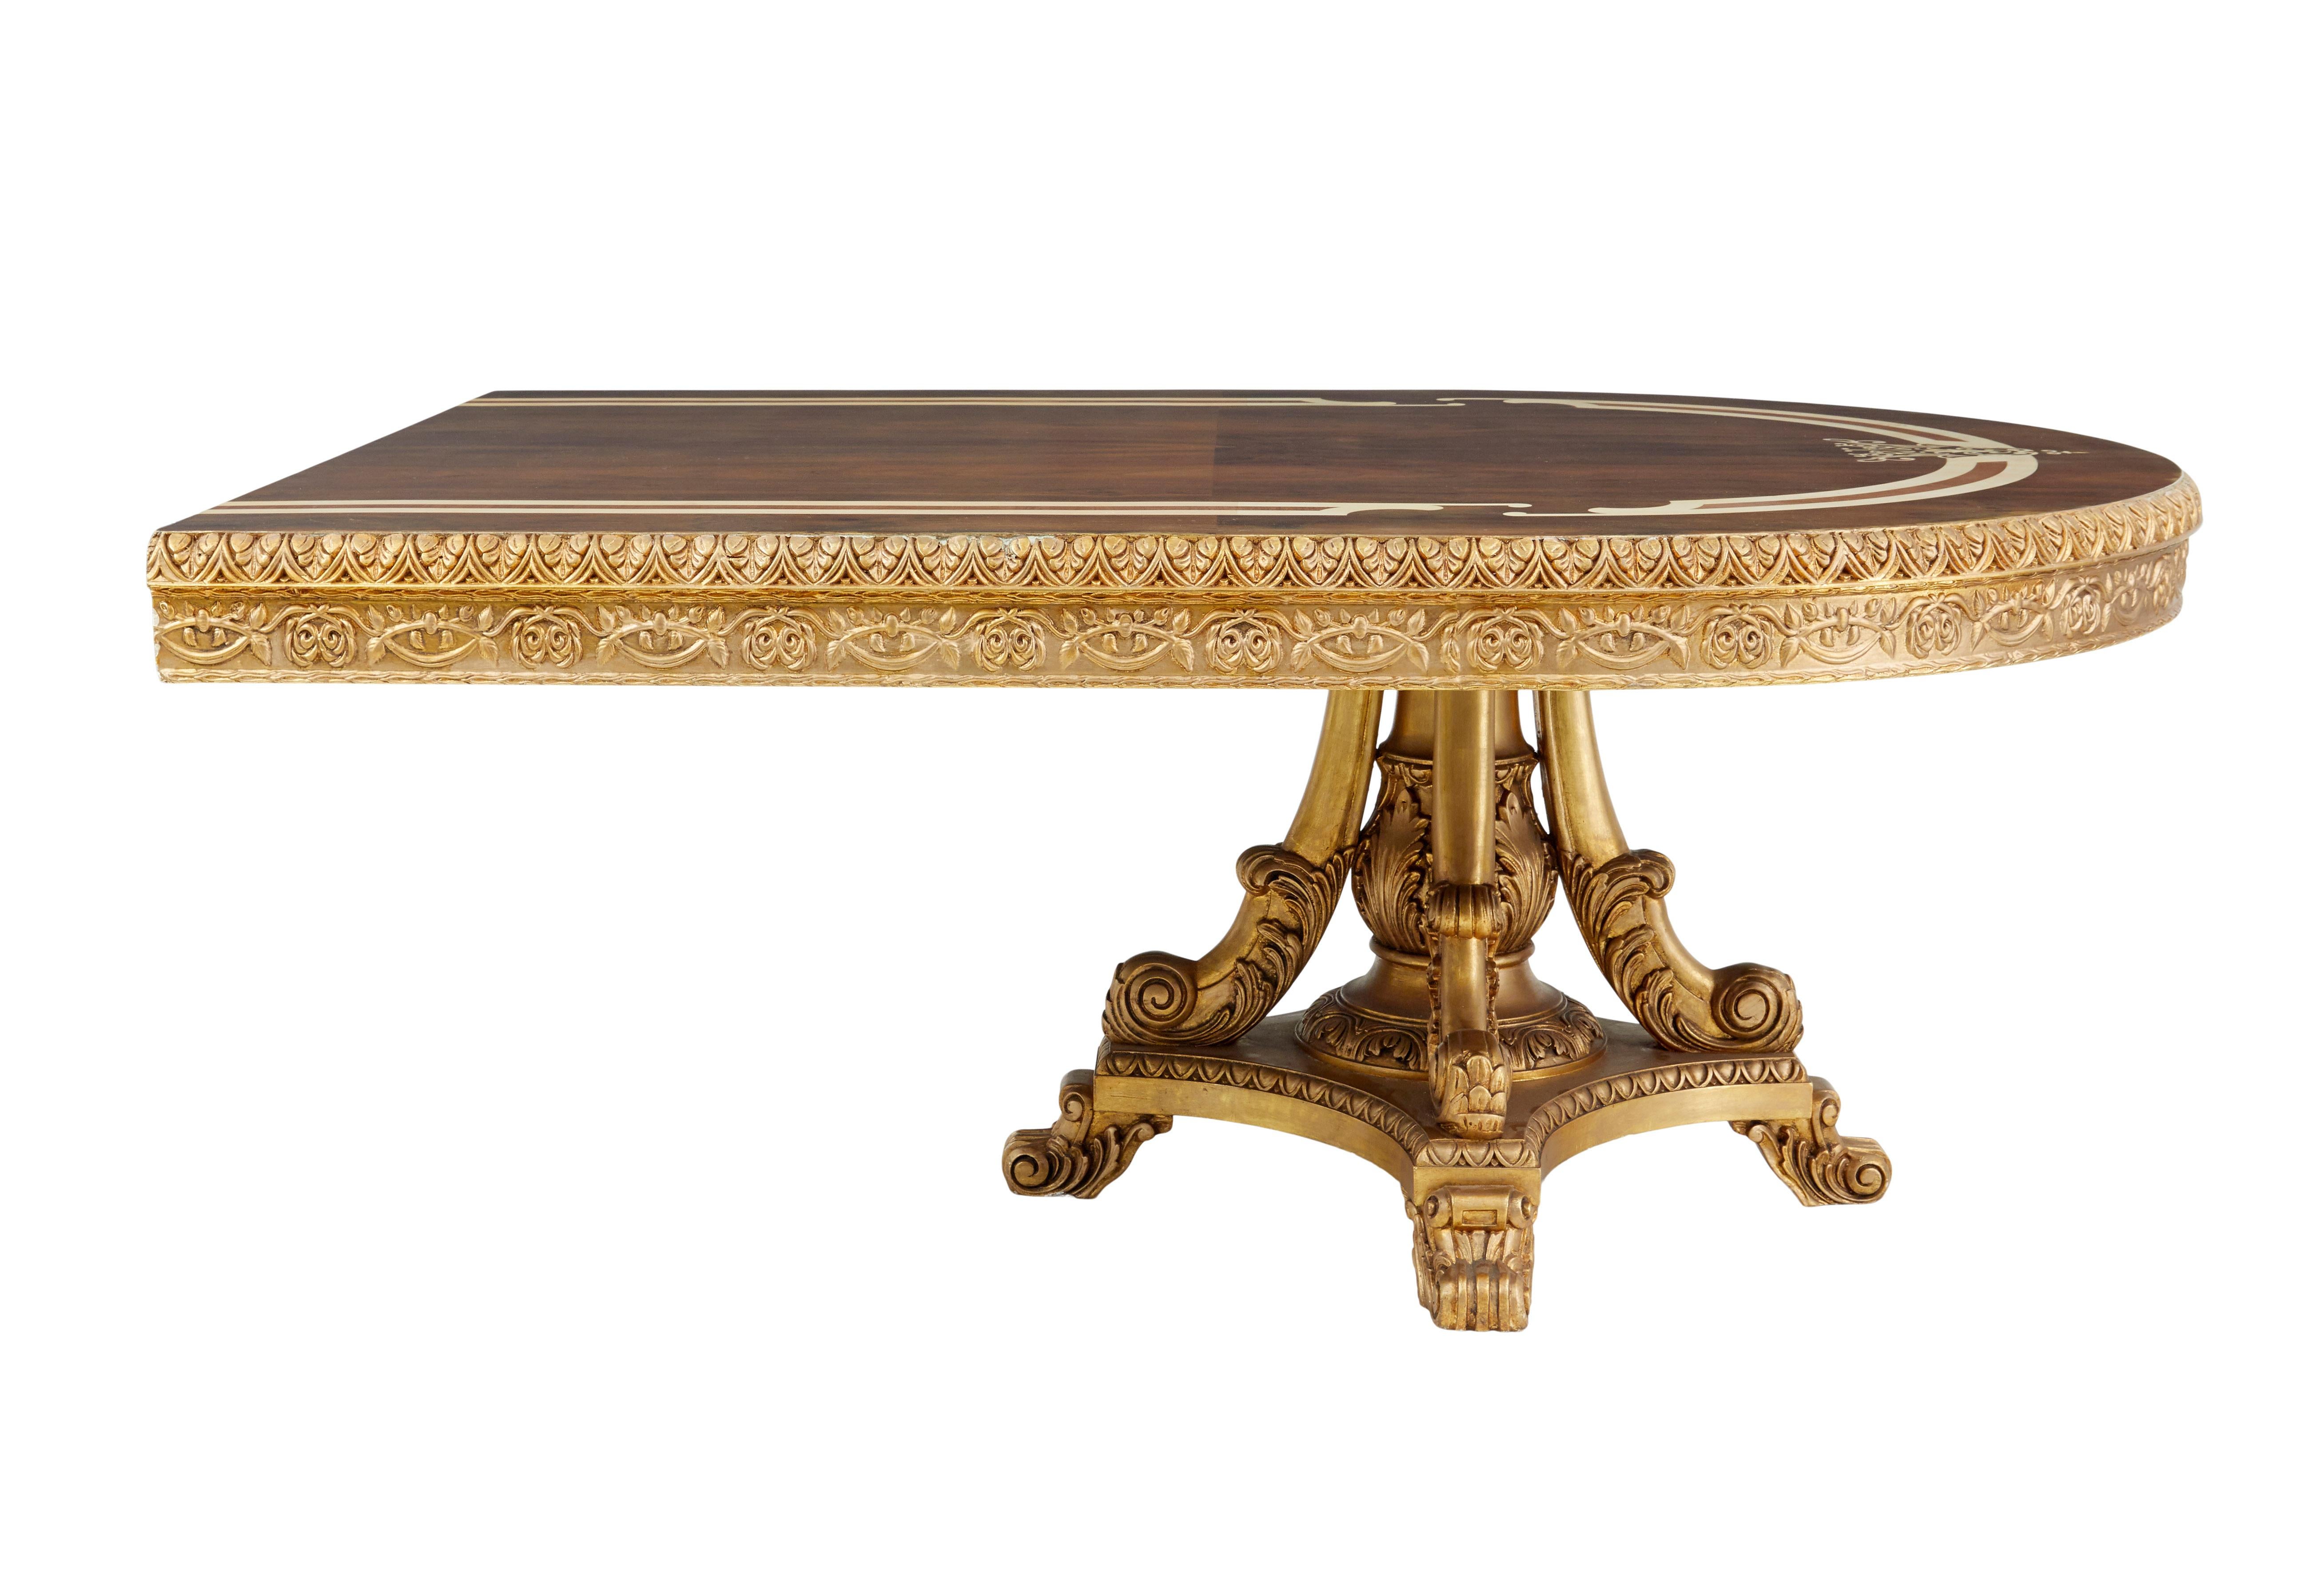 Impressive inlaid walnut and gilt dining tables of grand proportions.

We are pleased to offer this table of magnificent proportions, which could function as a entrance/lobby center piece or a dining table.  We believe this table was made as a one